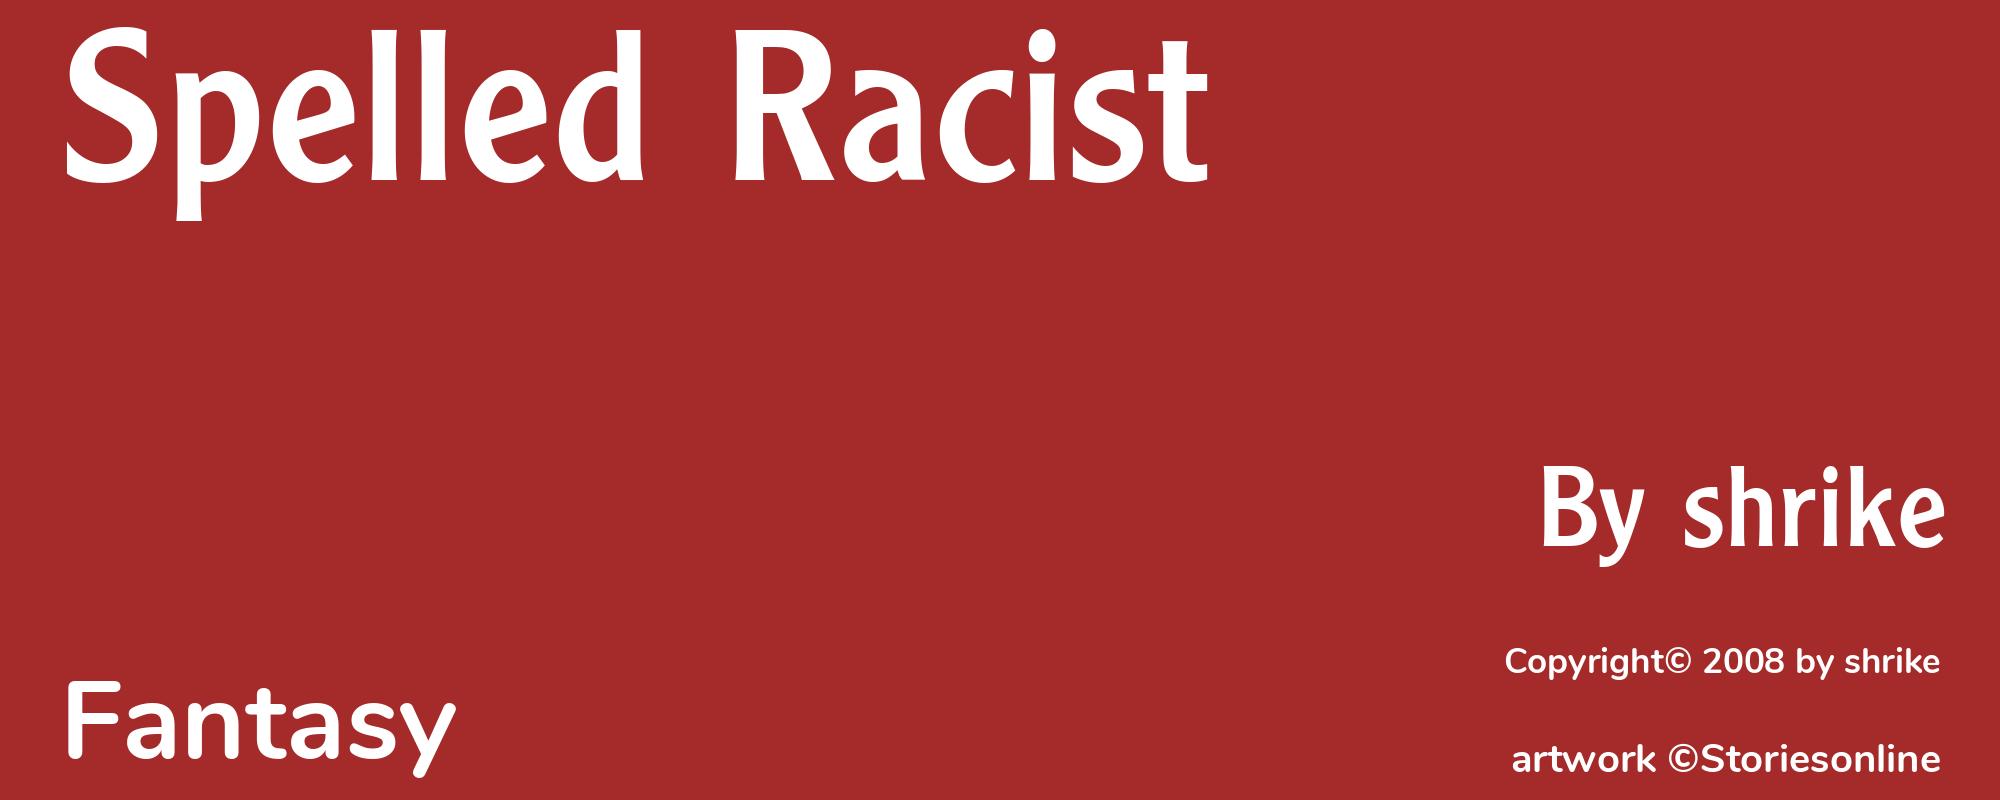 Spelled Racist - Cover